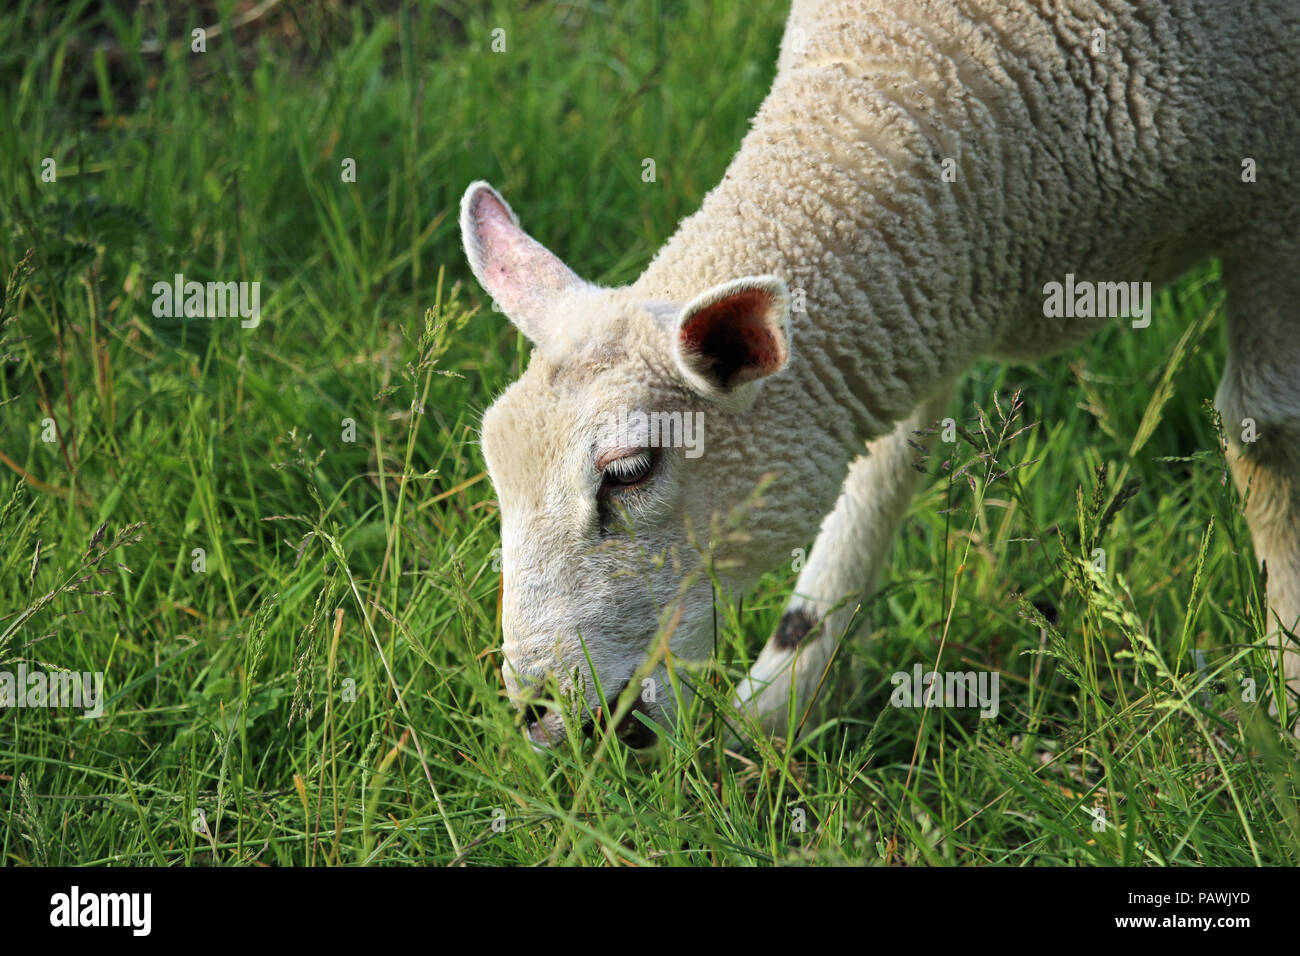 Head and shoulders of a white sheep grazing grass in a field in springtime with the grass field as background. Stock Photo